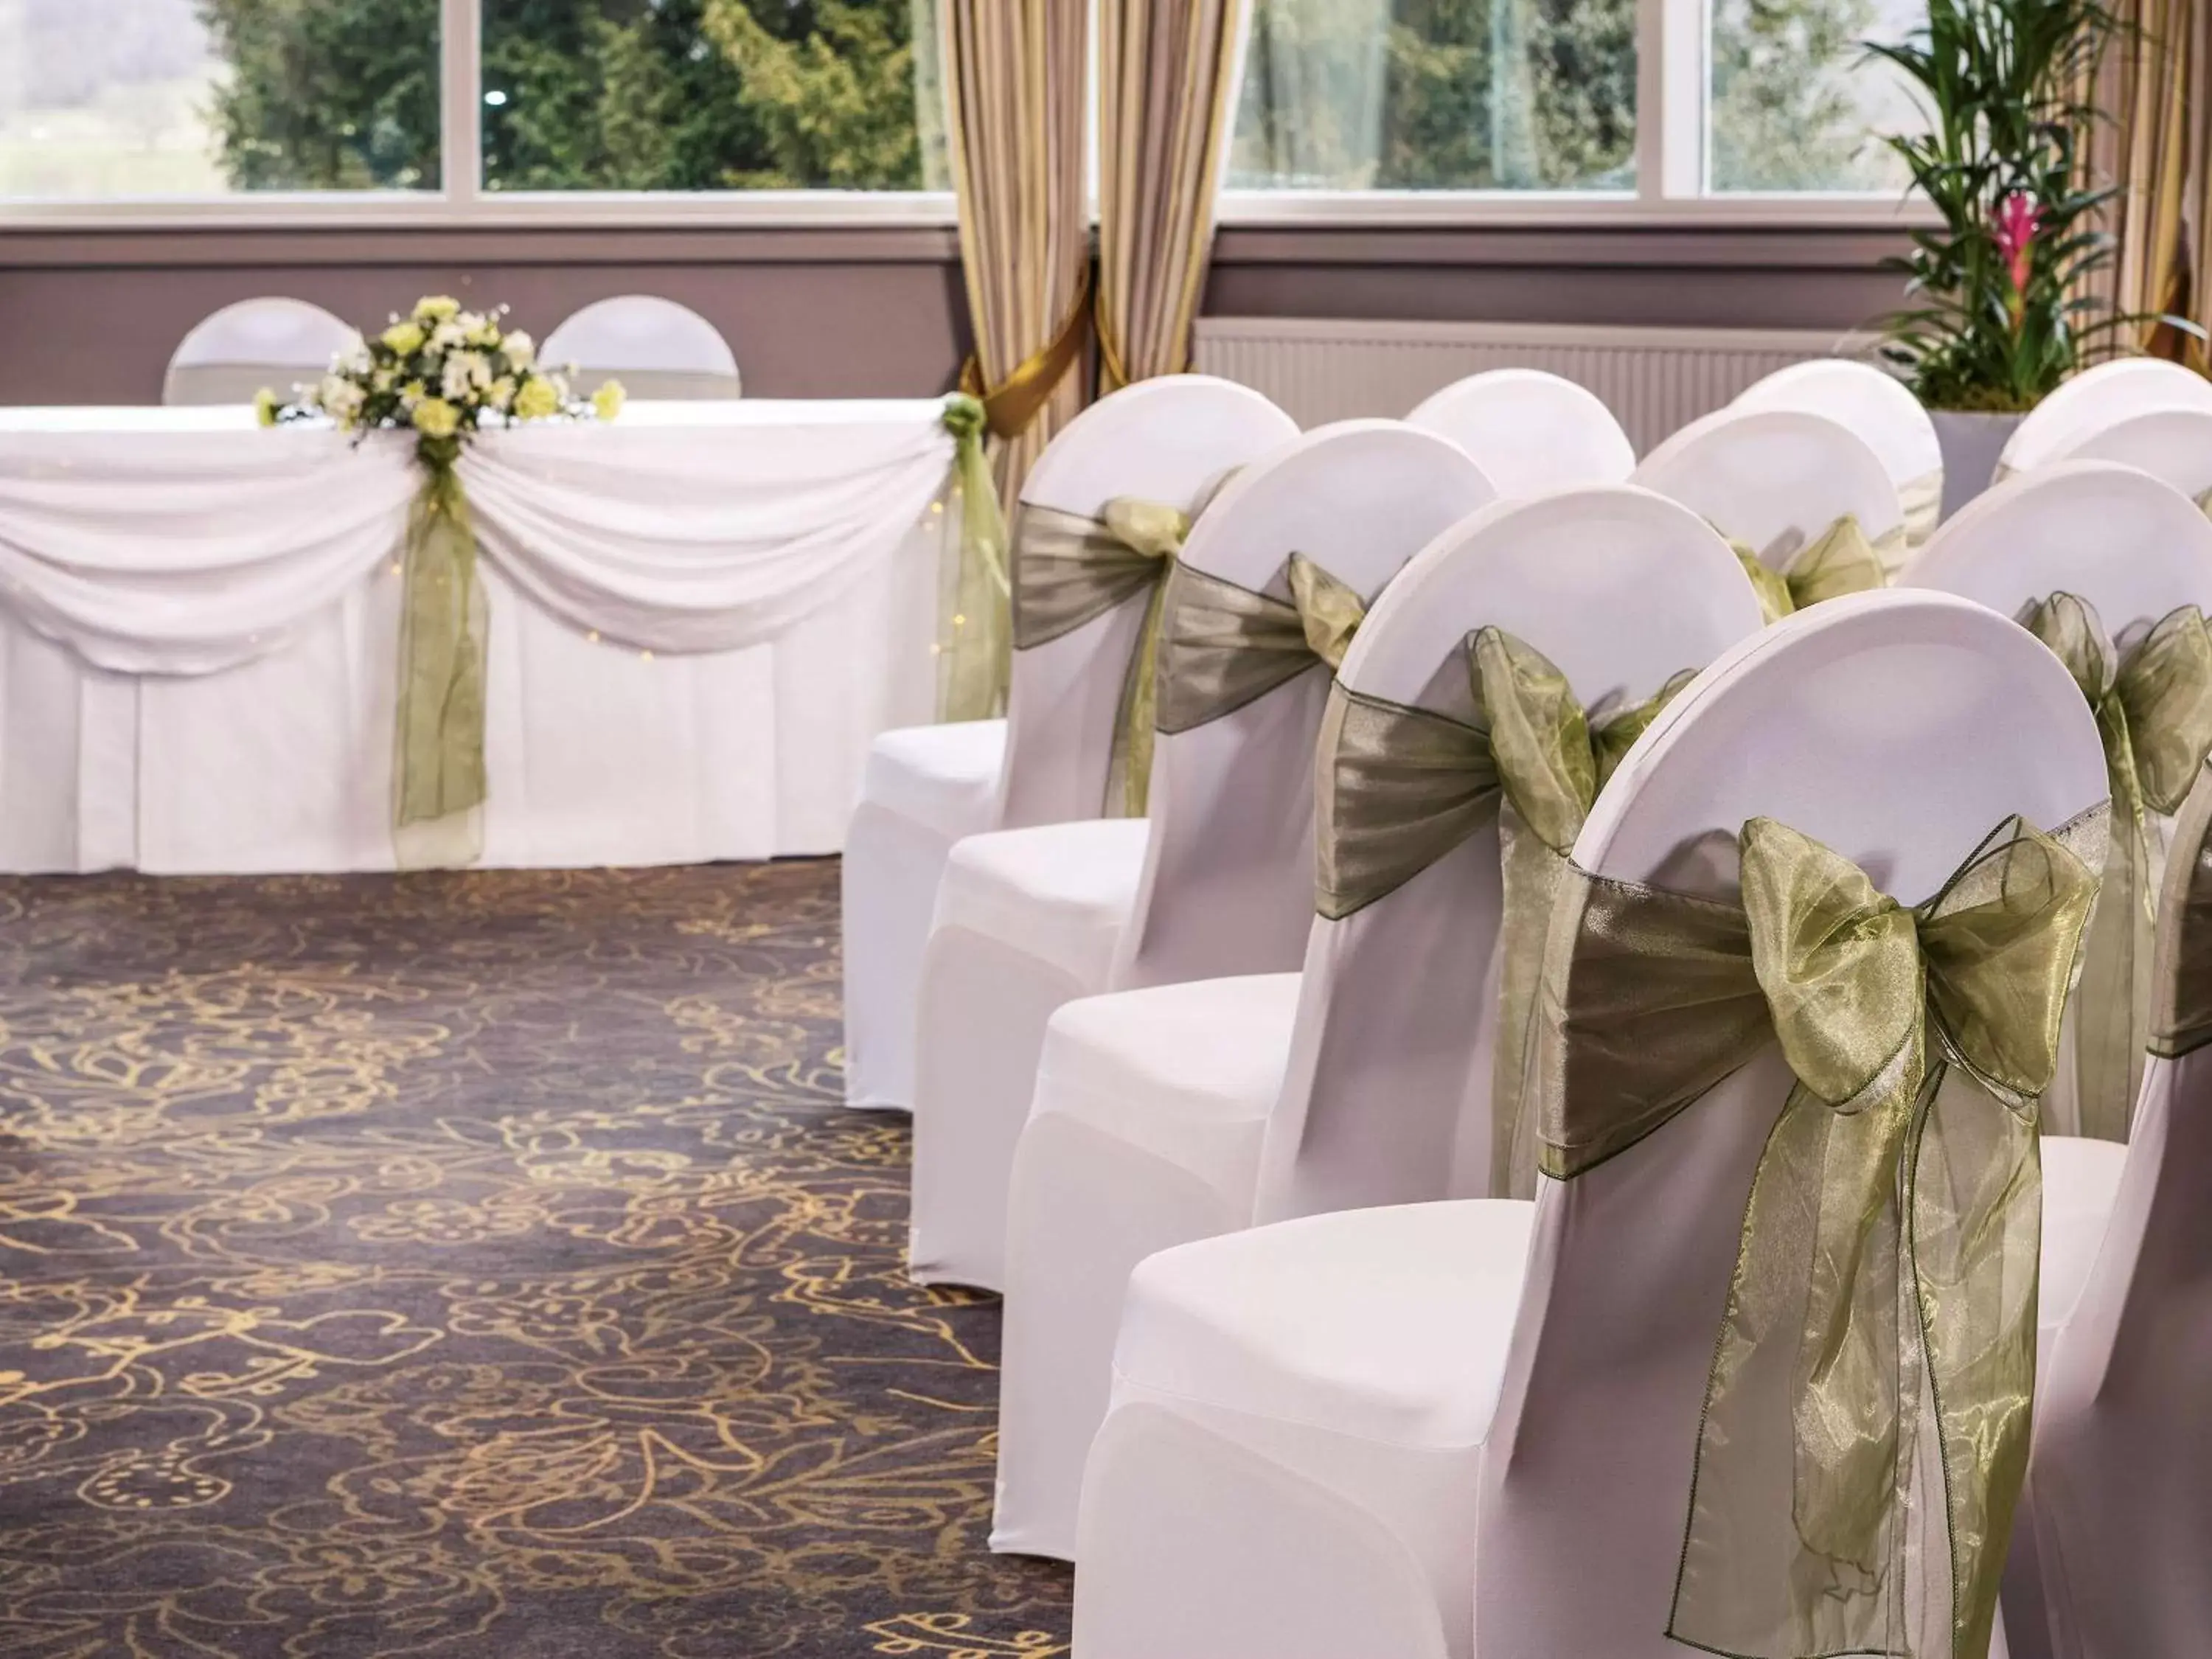 Other, Banquet Facilities in Mercure Bradford, Bankfield Hotel